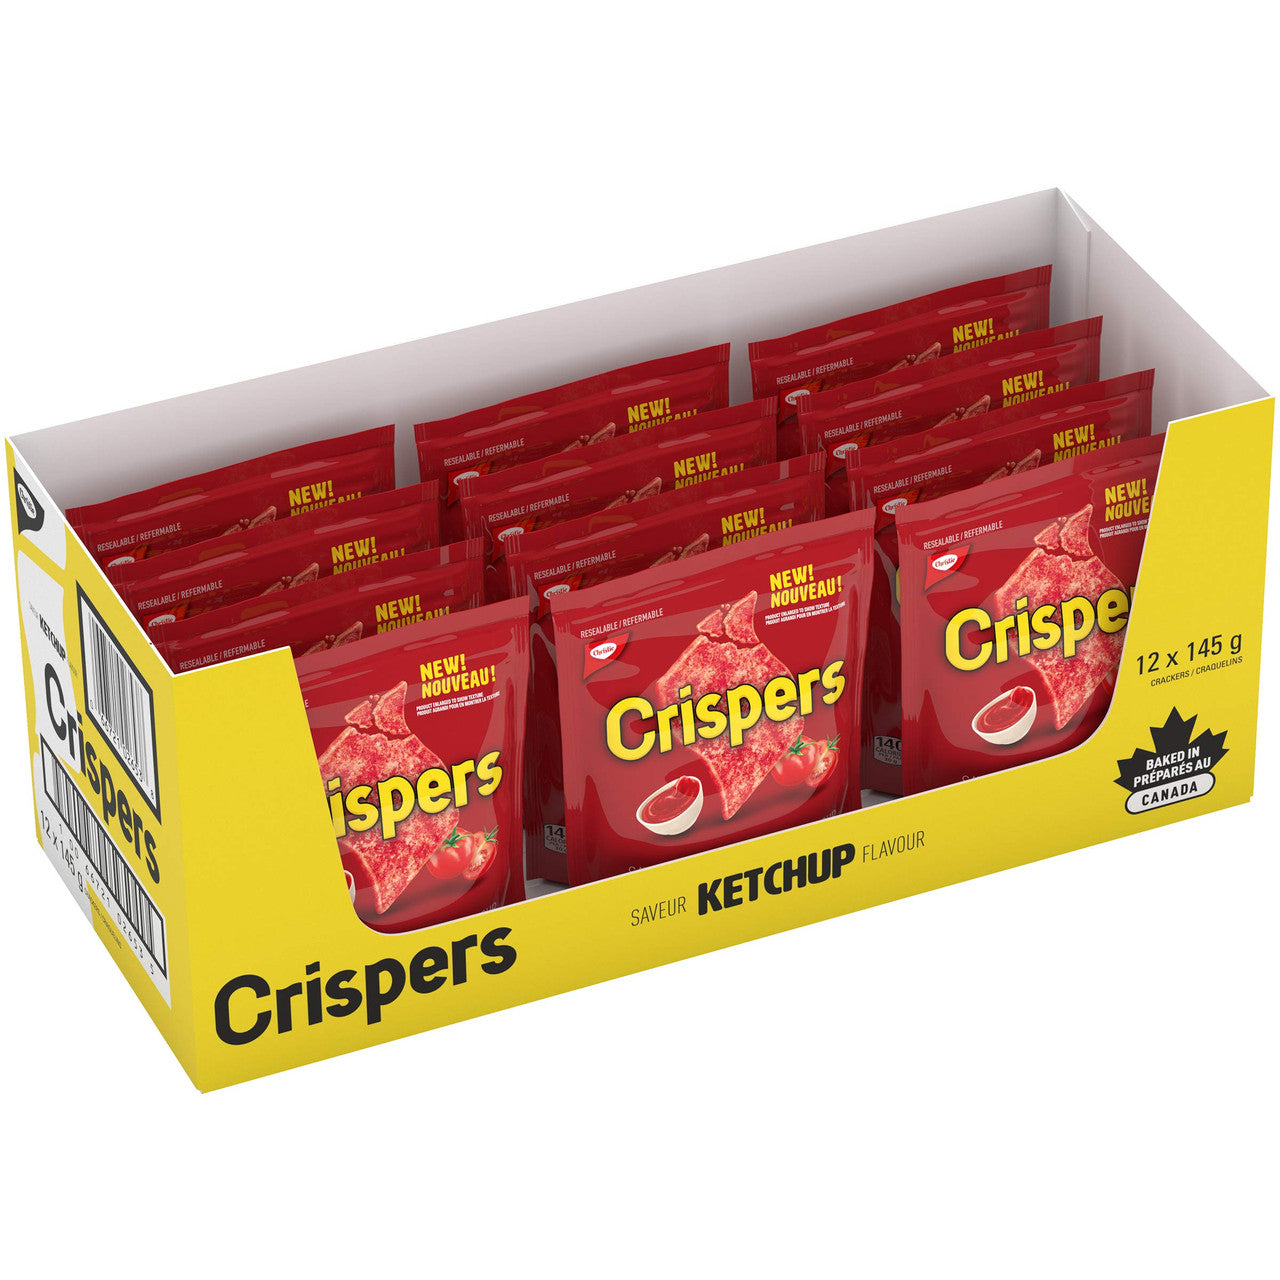 Christie Crispers Ketchup Crackers, 145g/5.1 Ounce, Bag, (12 Pack) {Imported from Canada}